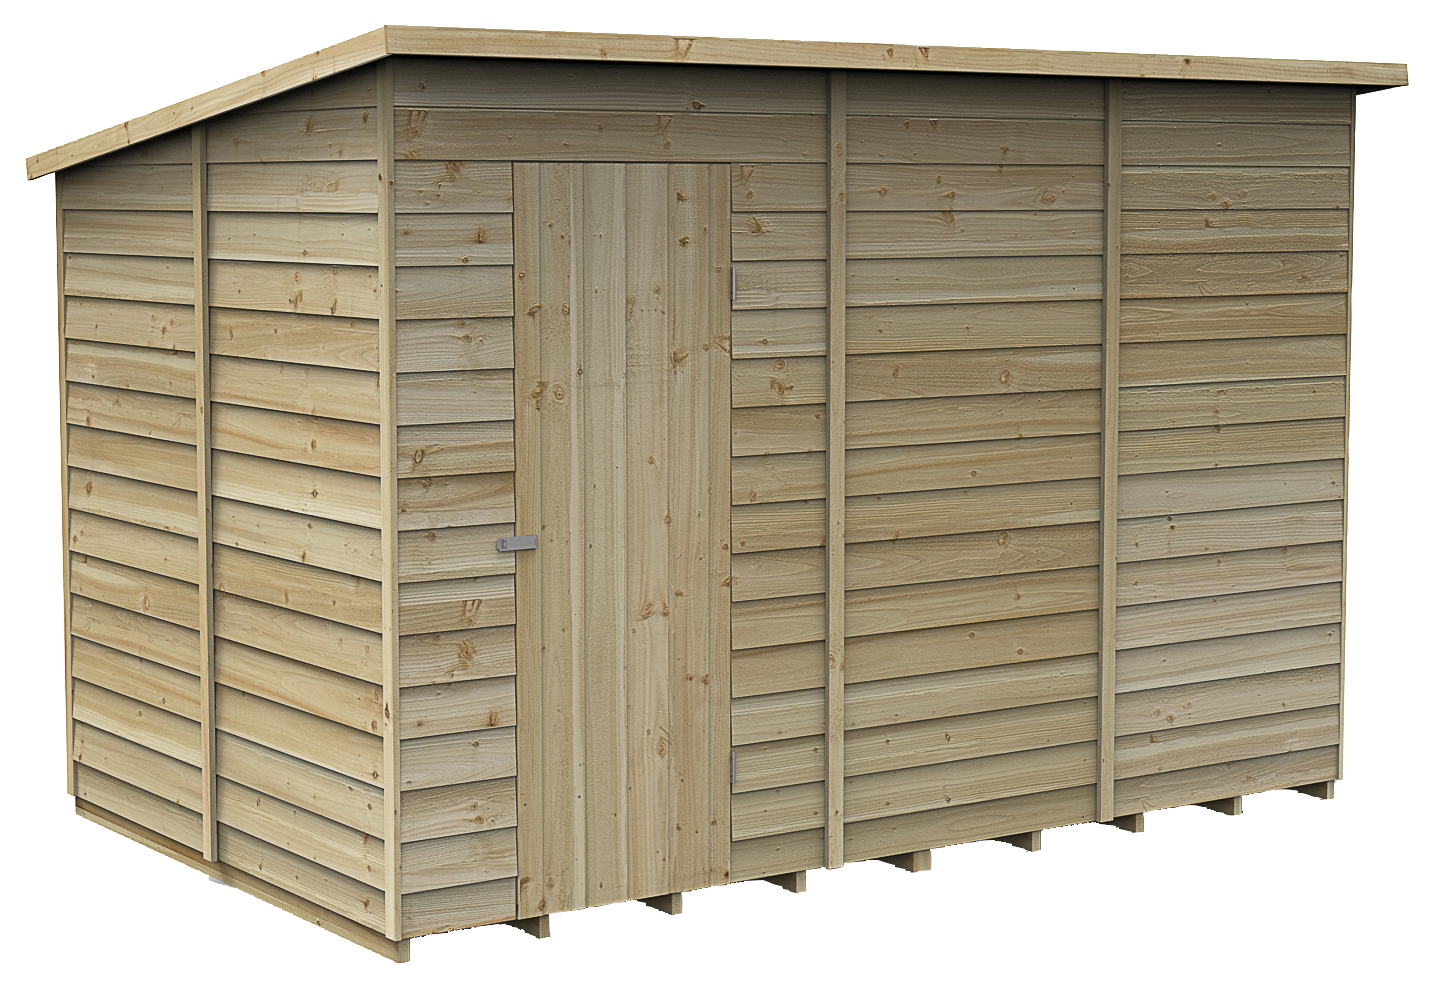 Forest Garden 10 x 6ft 4Life Pent Overlap Pressure Treated Windowless Shed with Base